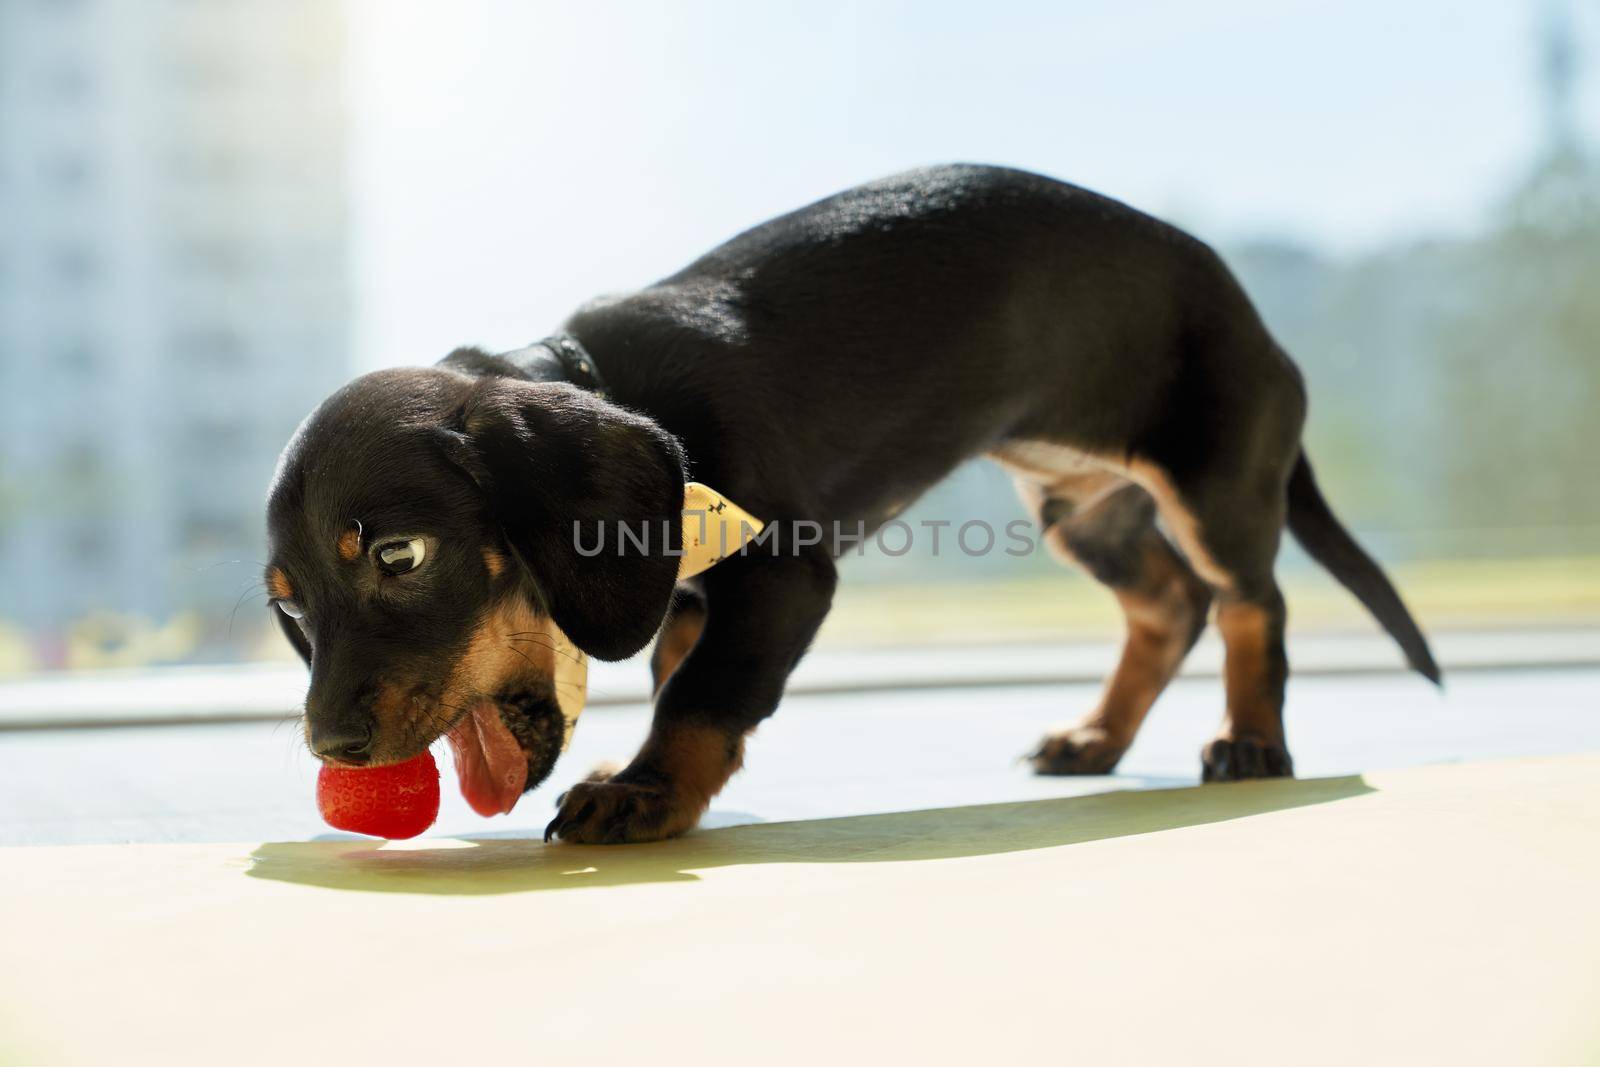 Black, little dachshund puppy with brown paws and neck standing, biting strawberry. by SerhiiBobyk